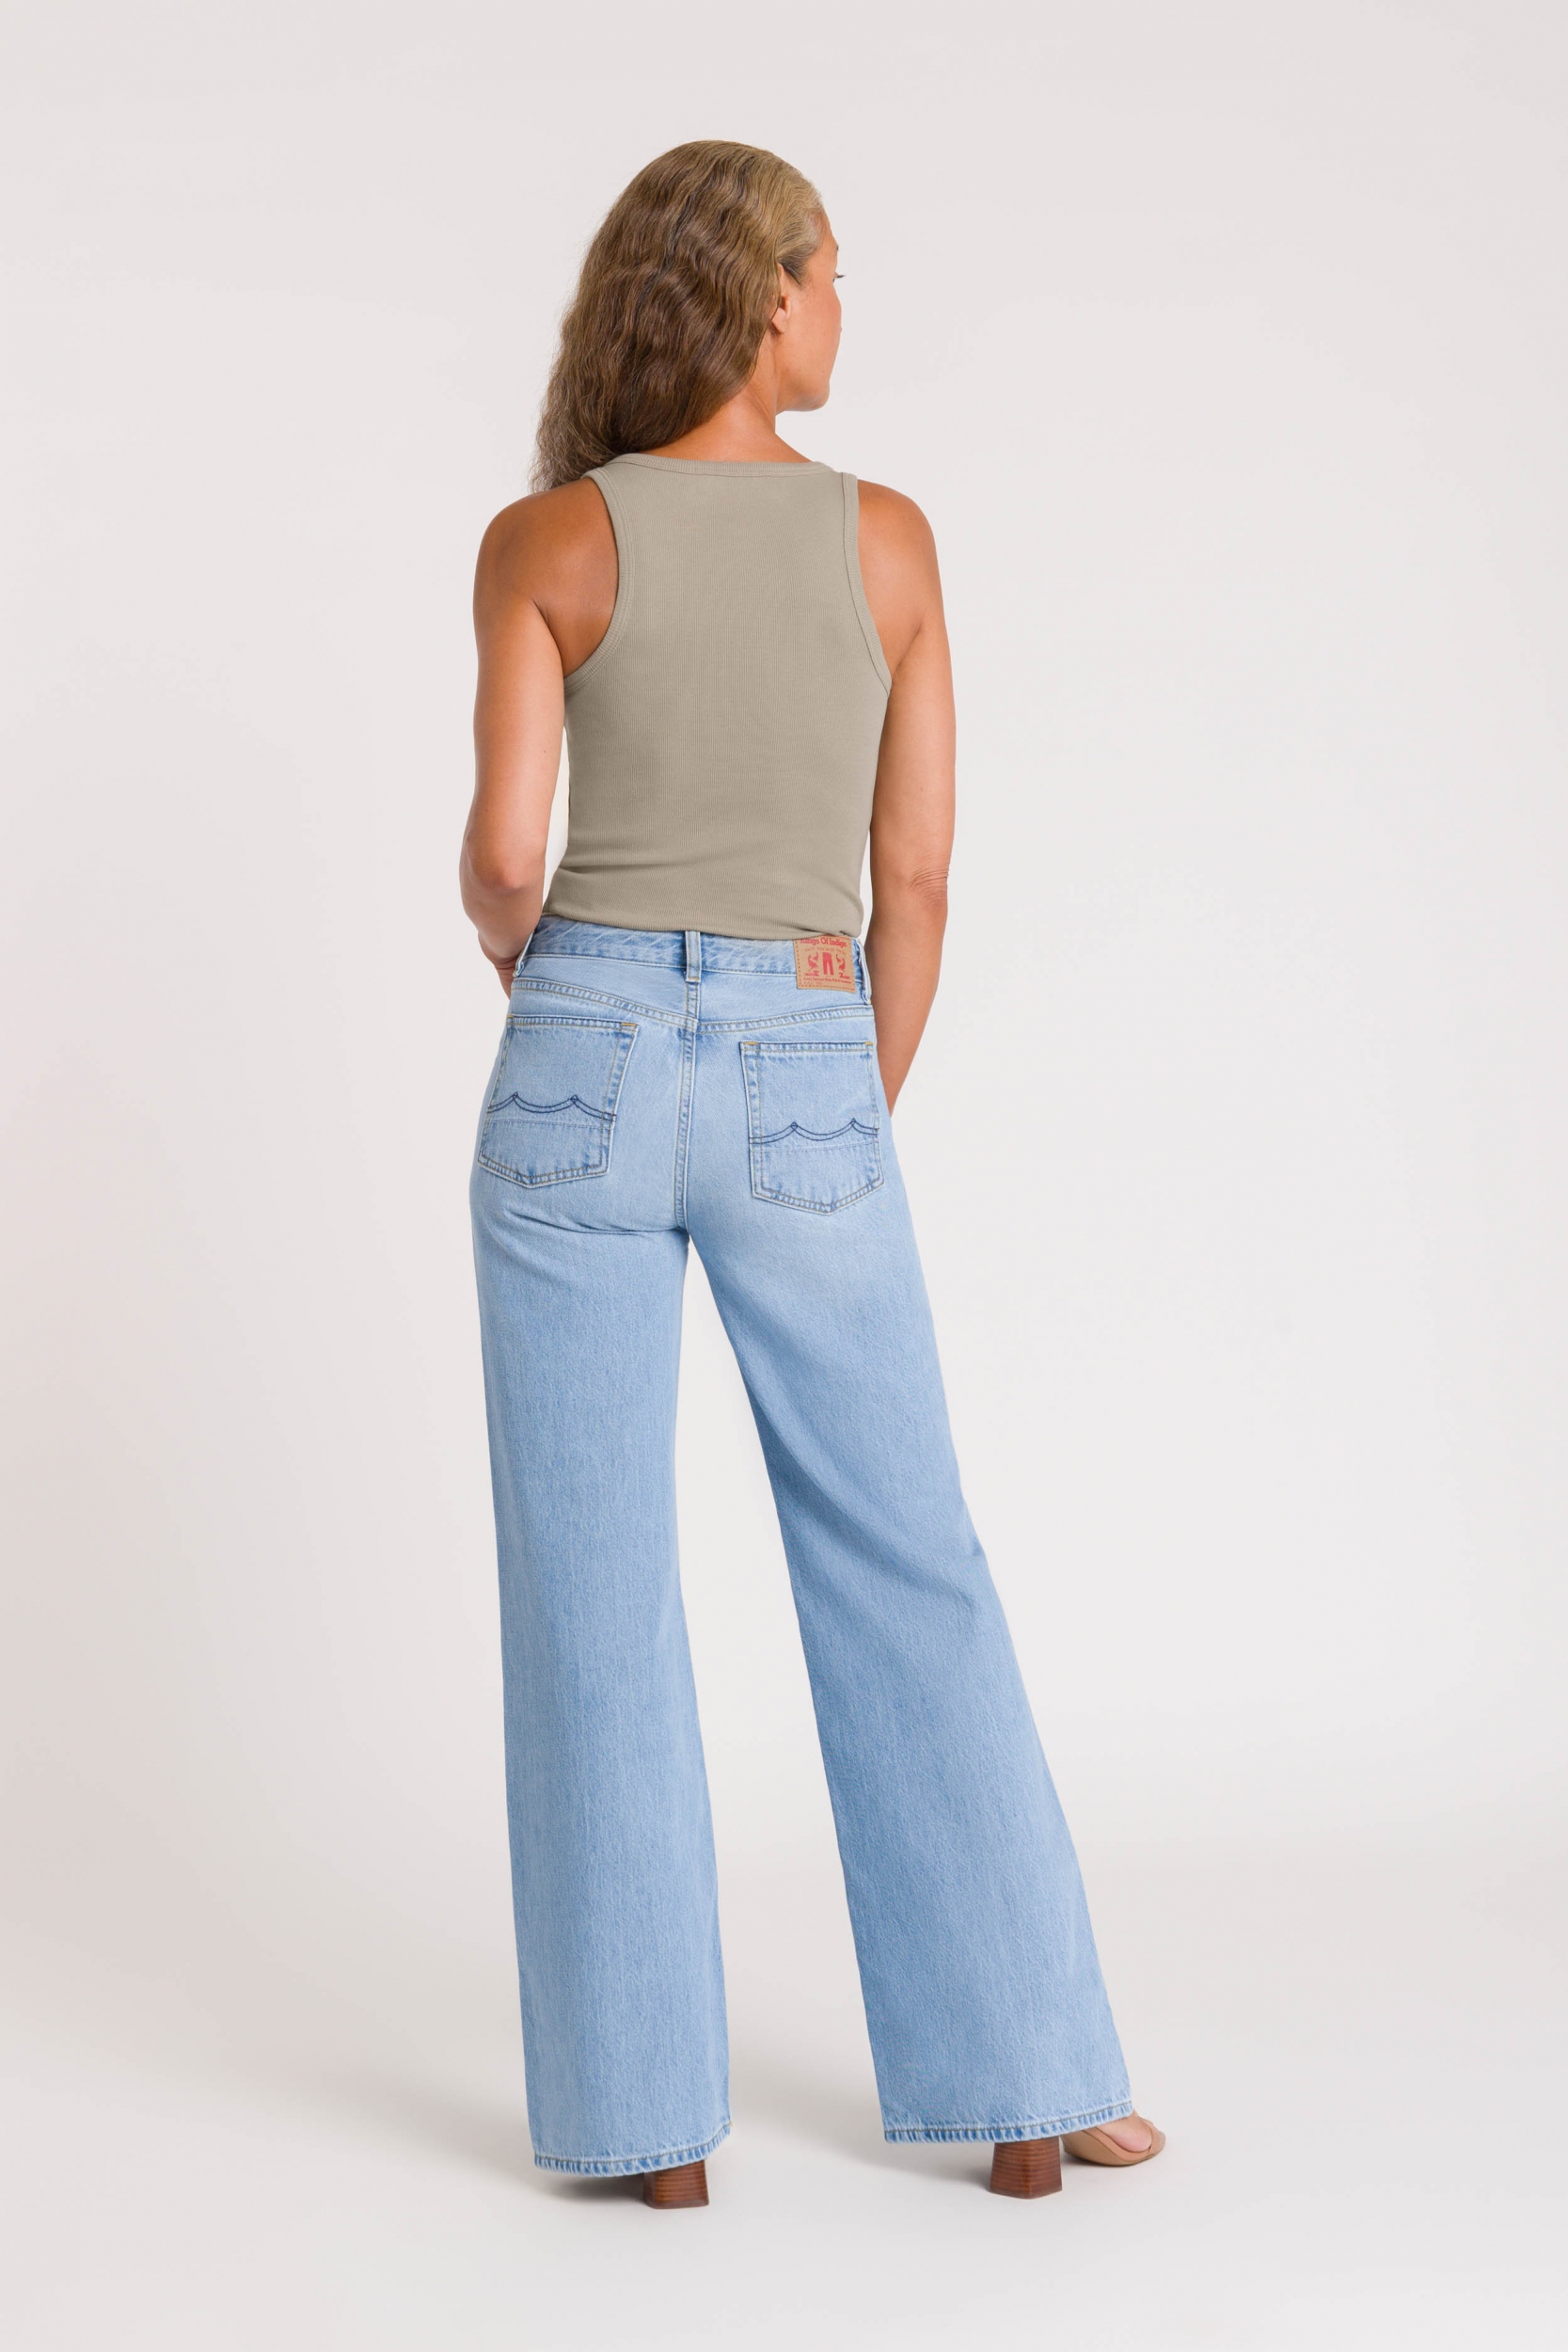 Jane - Mid rise Relaxed flare - Blue Reef Super Light Used